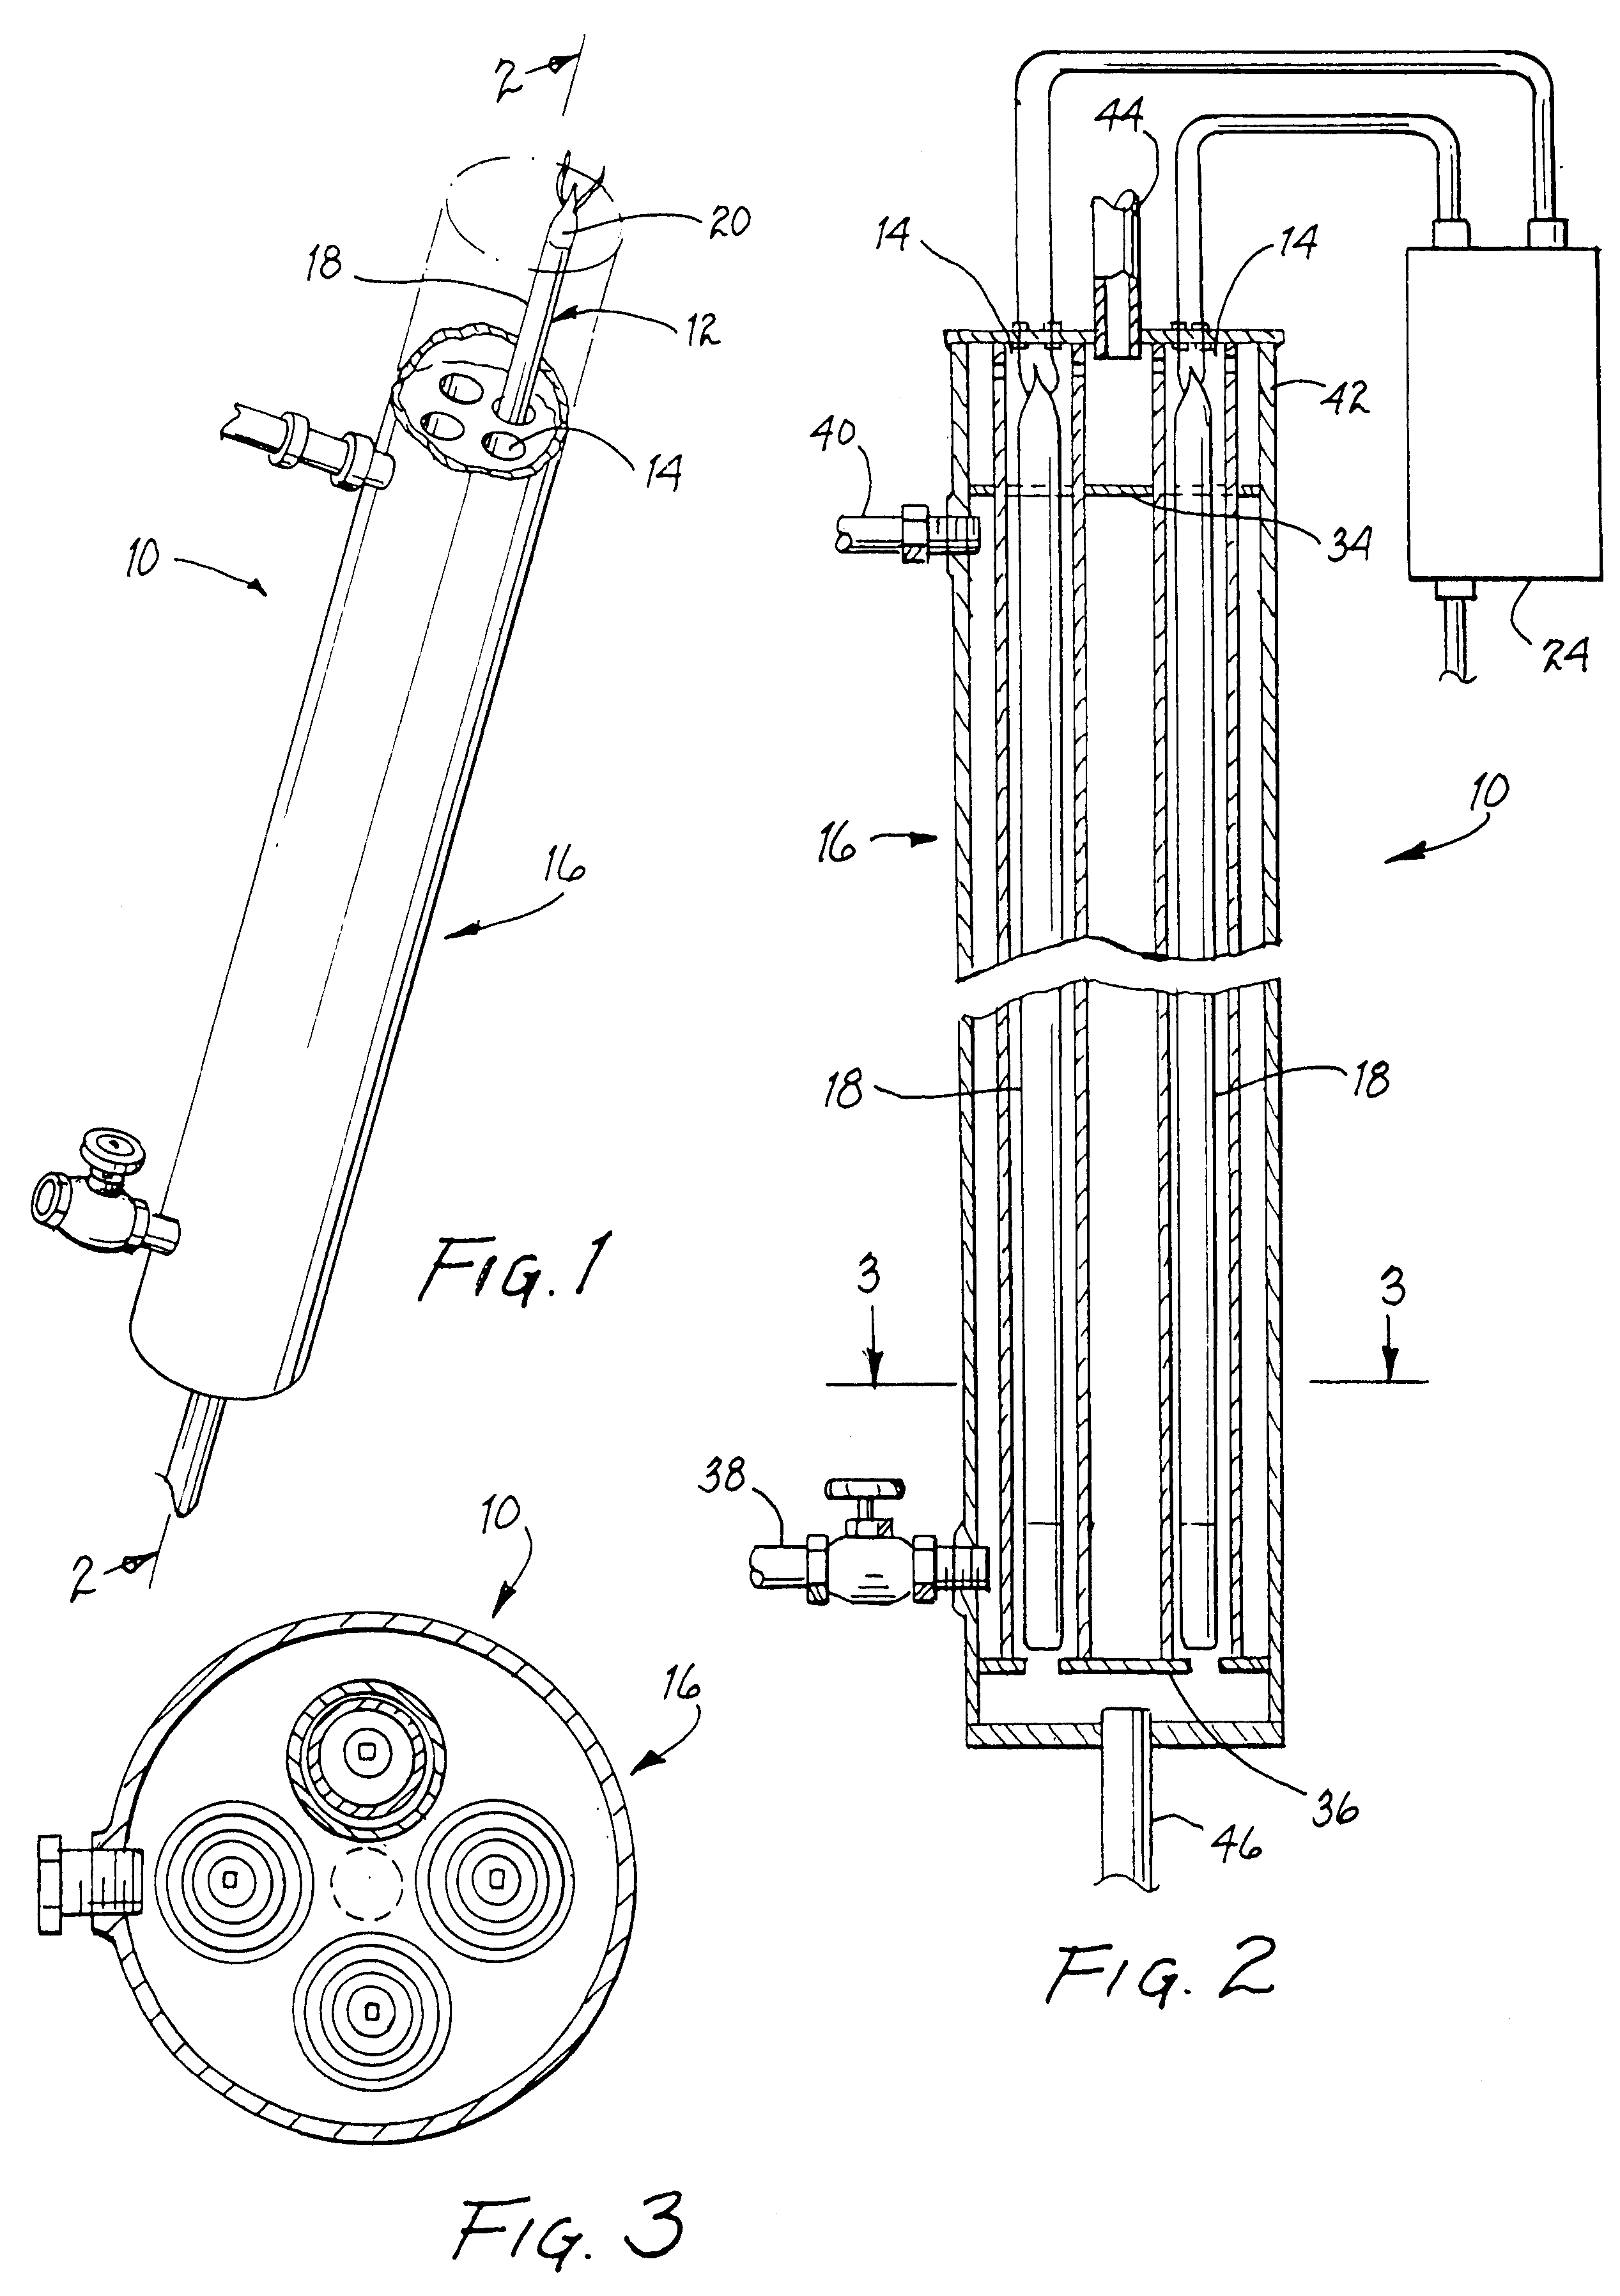 System and method for treating irrigation water